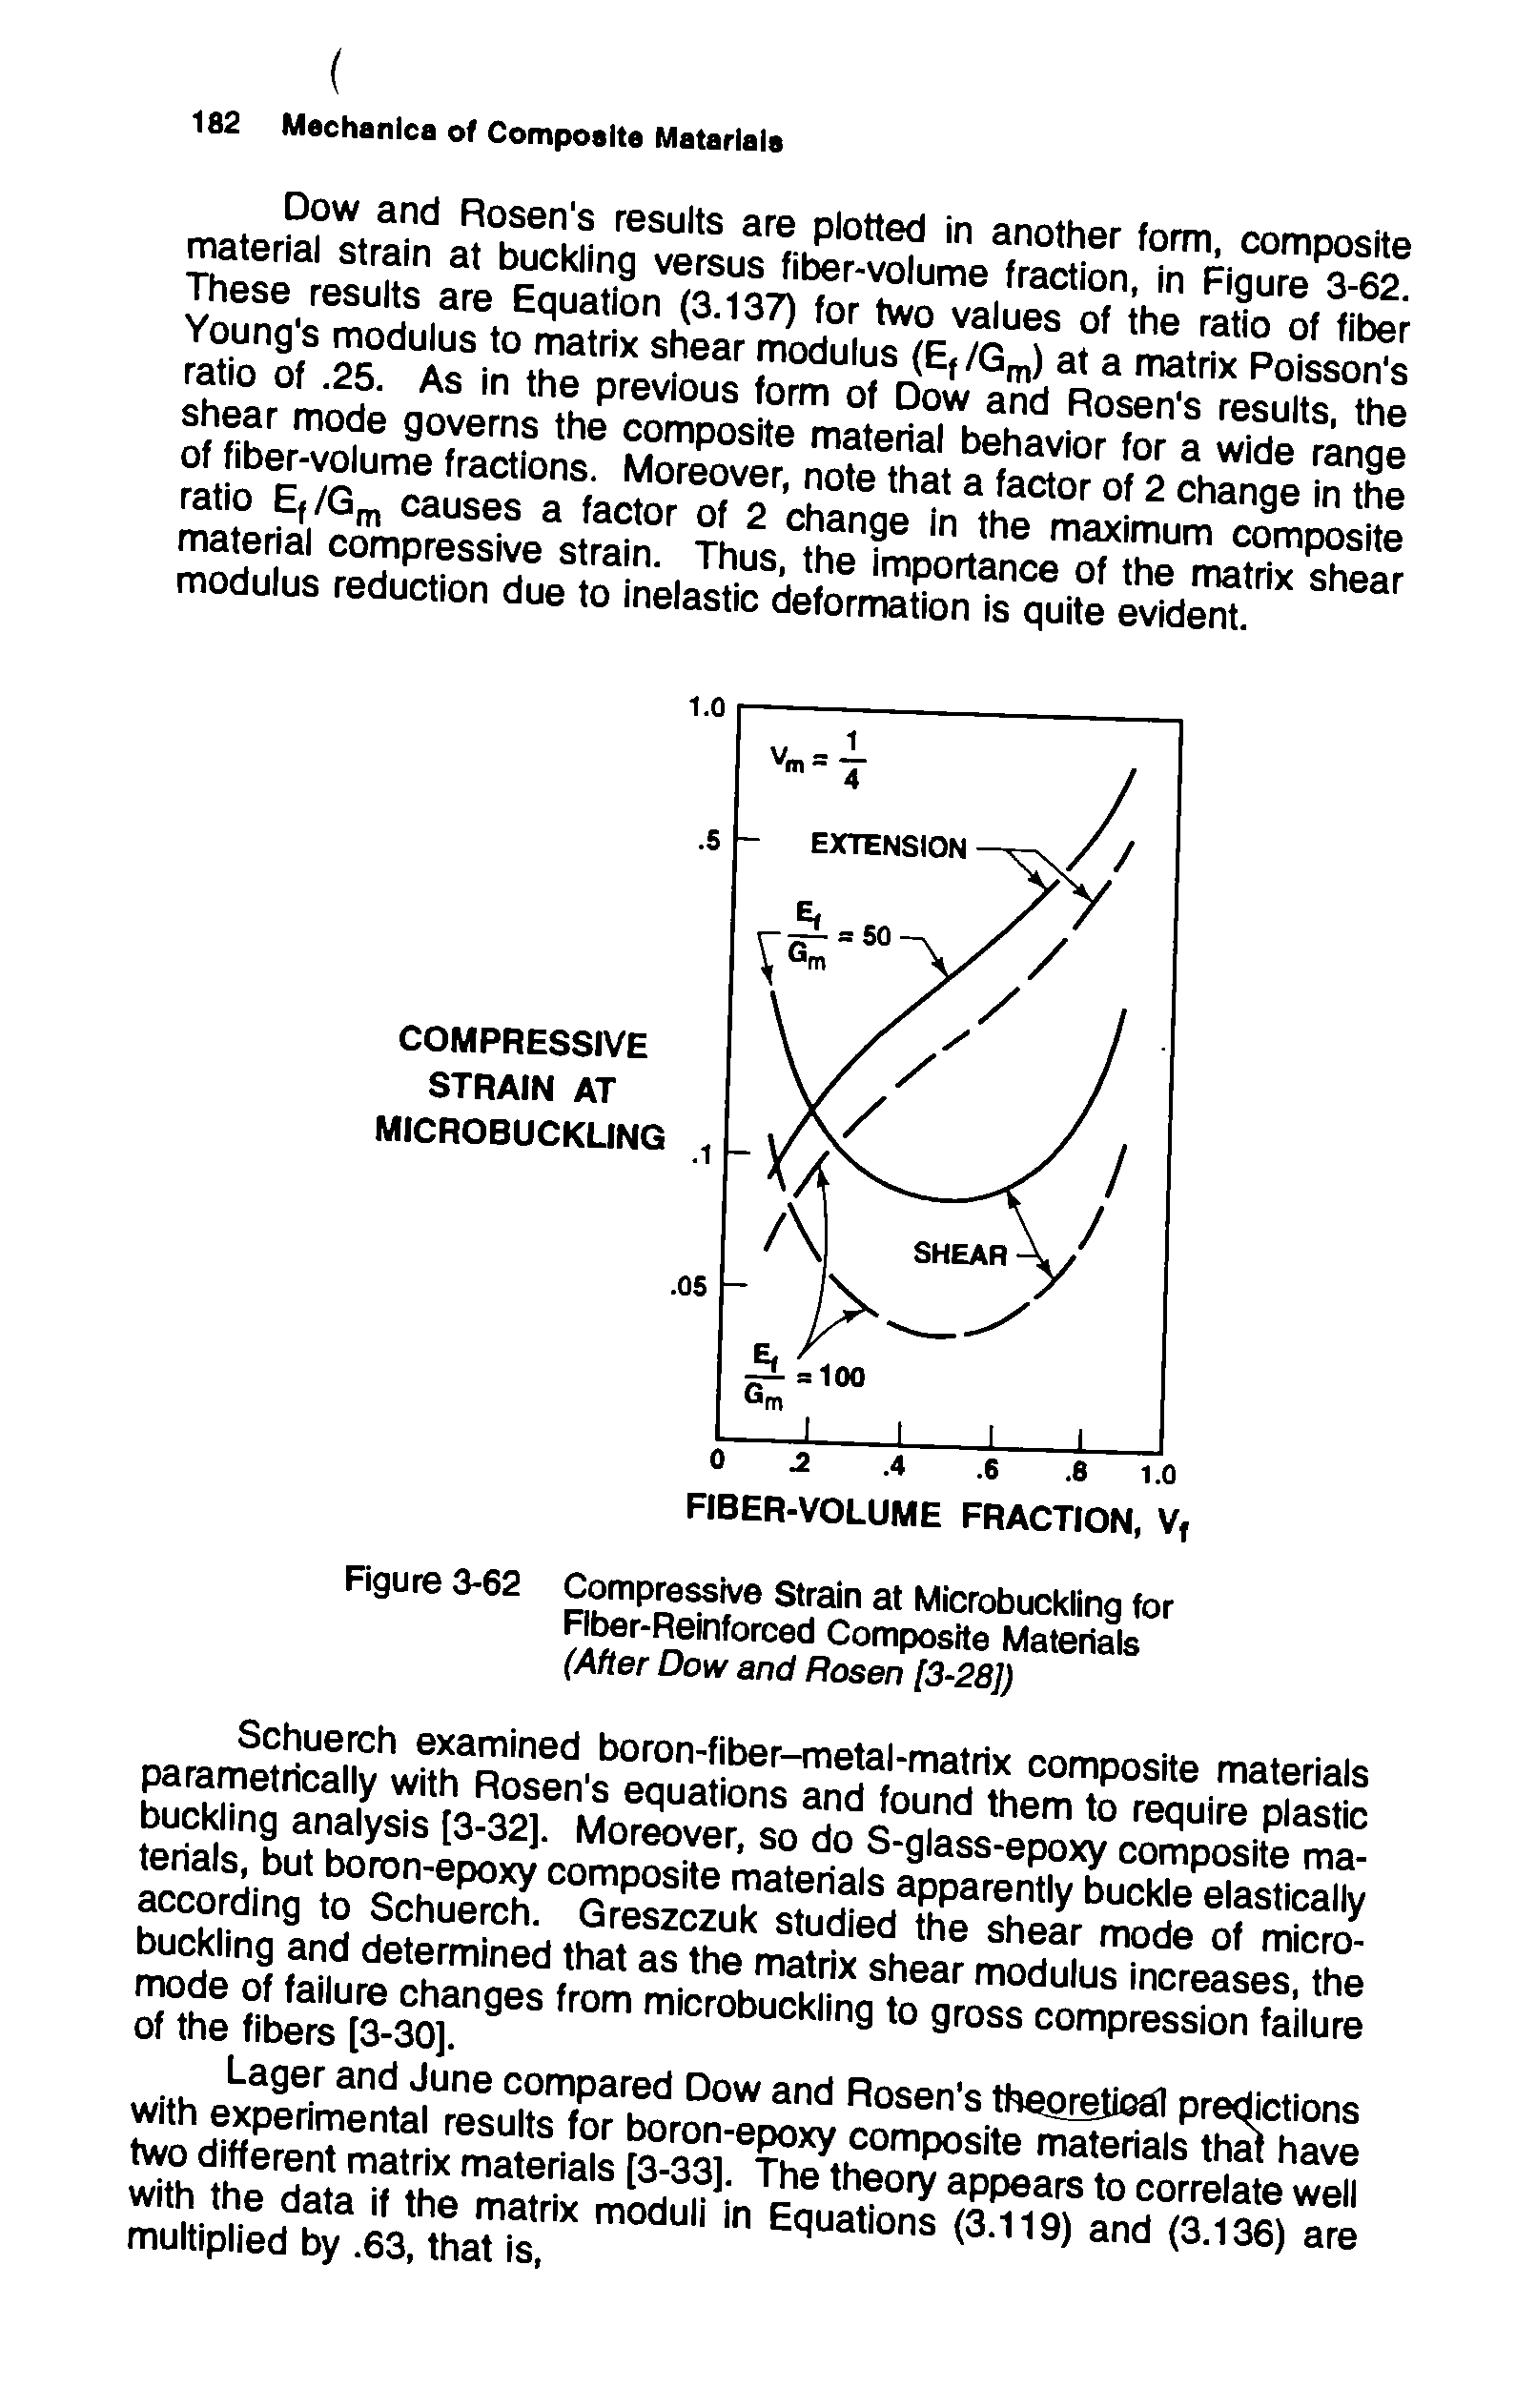 Figure 3-62 Compressive Strain at Microbuckling for Fiber-Reinforced Composite Materials (After Dow and Rosen [3-28])...